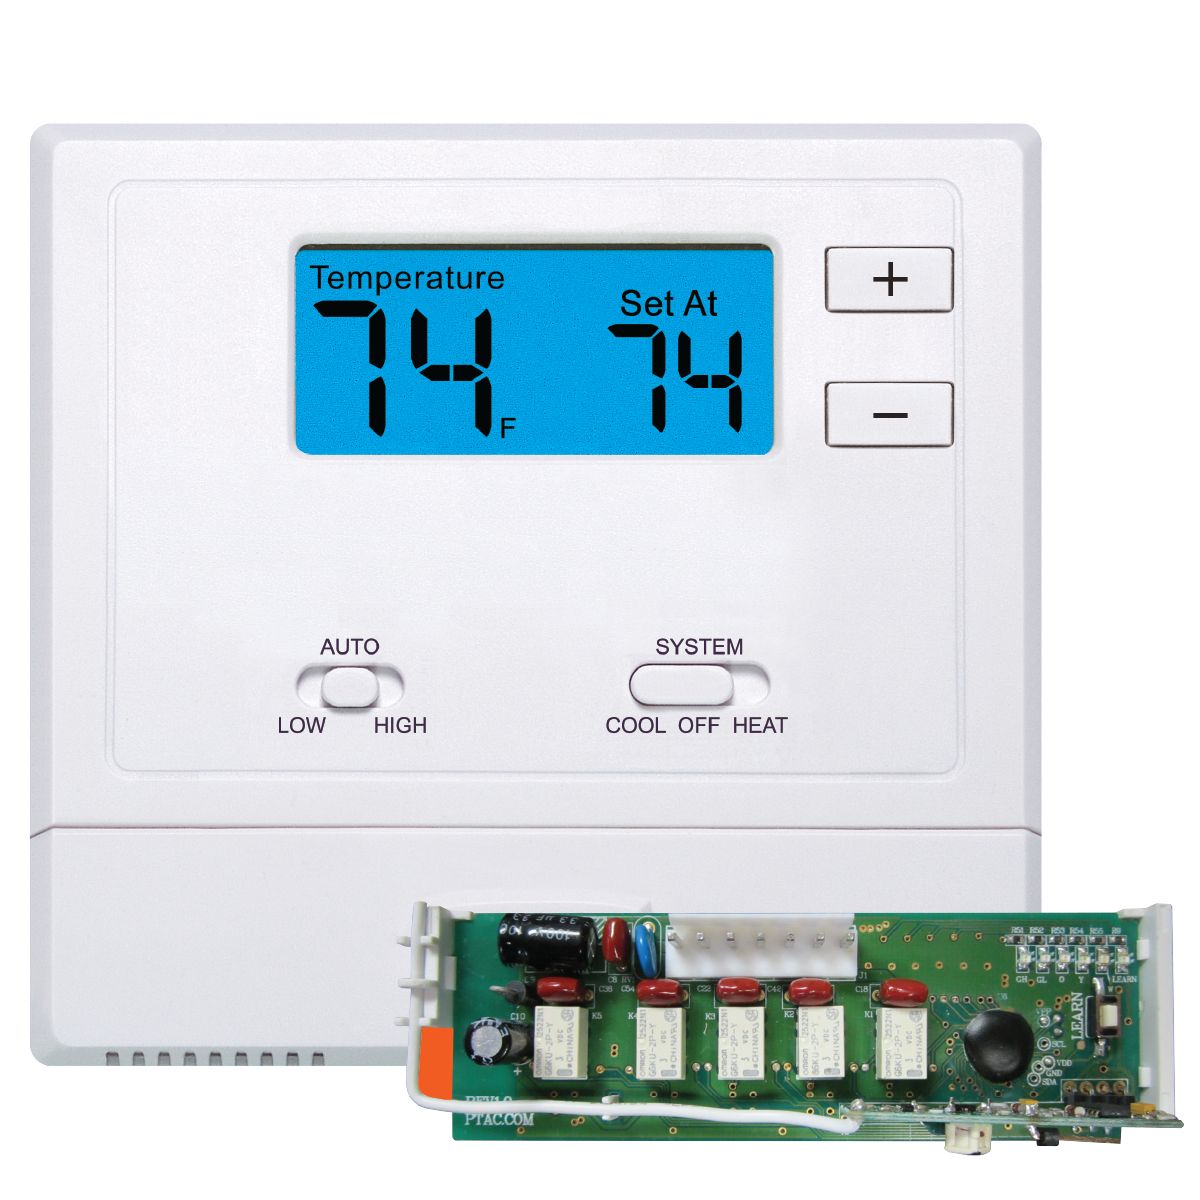 VIVE - TRADEPRO® - Wireless PTAC Thermostat Non-Programmable 1H/1C Conventional or 2H/1C Heat Pump w/ 2" Sq. In Display